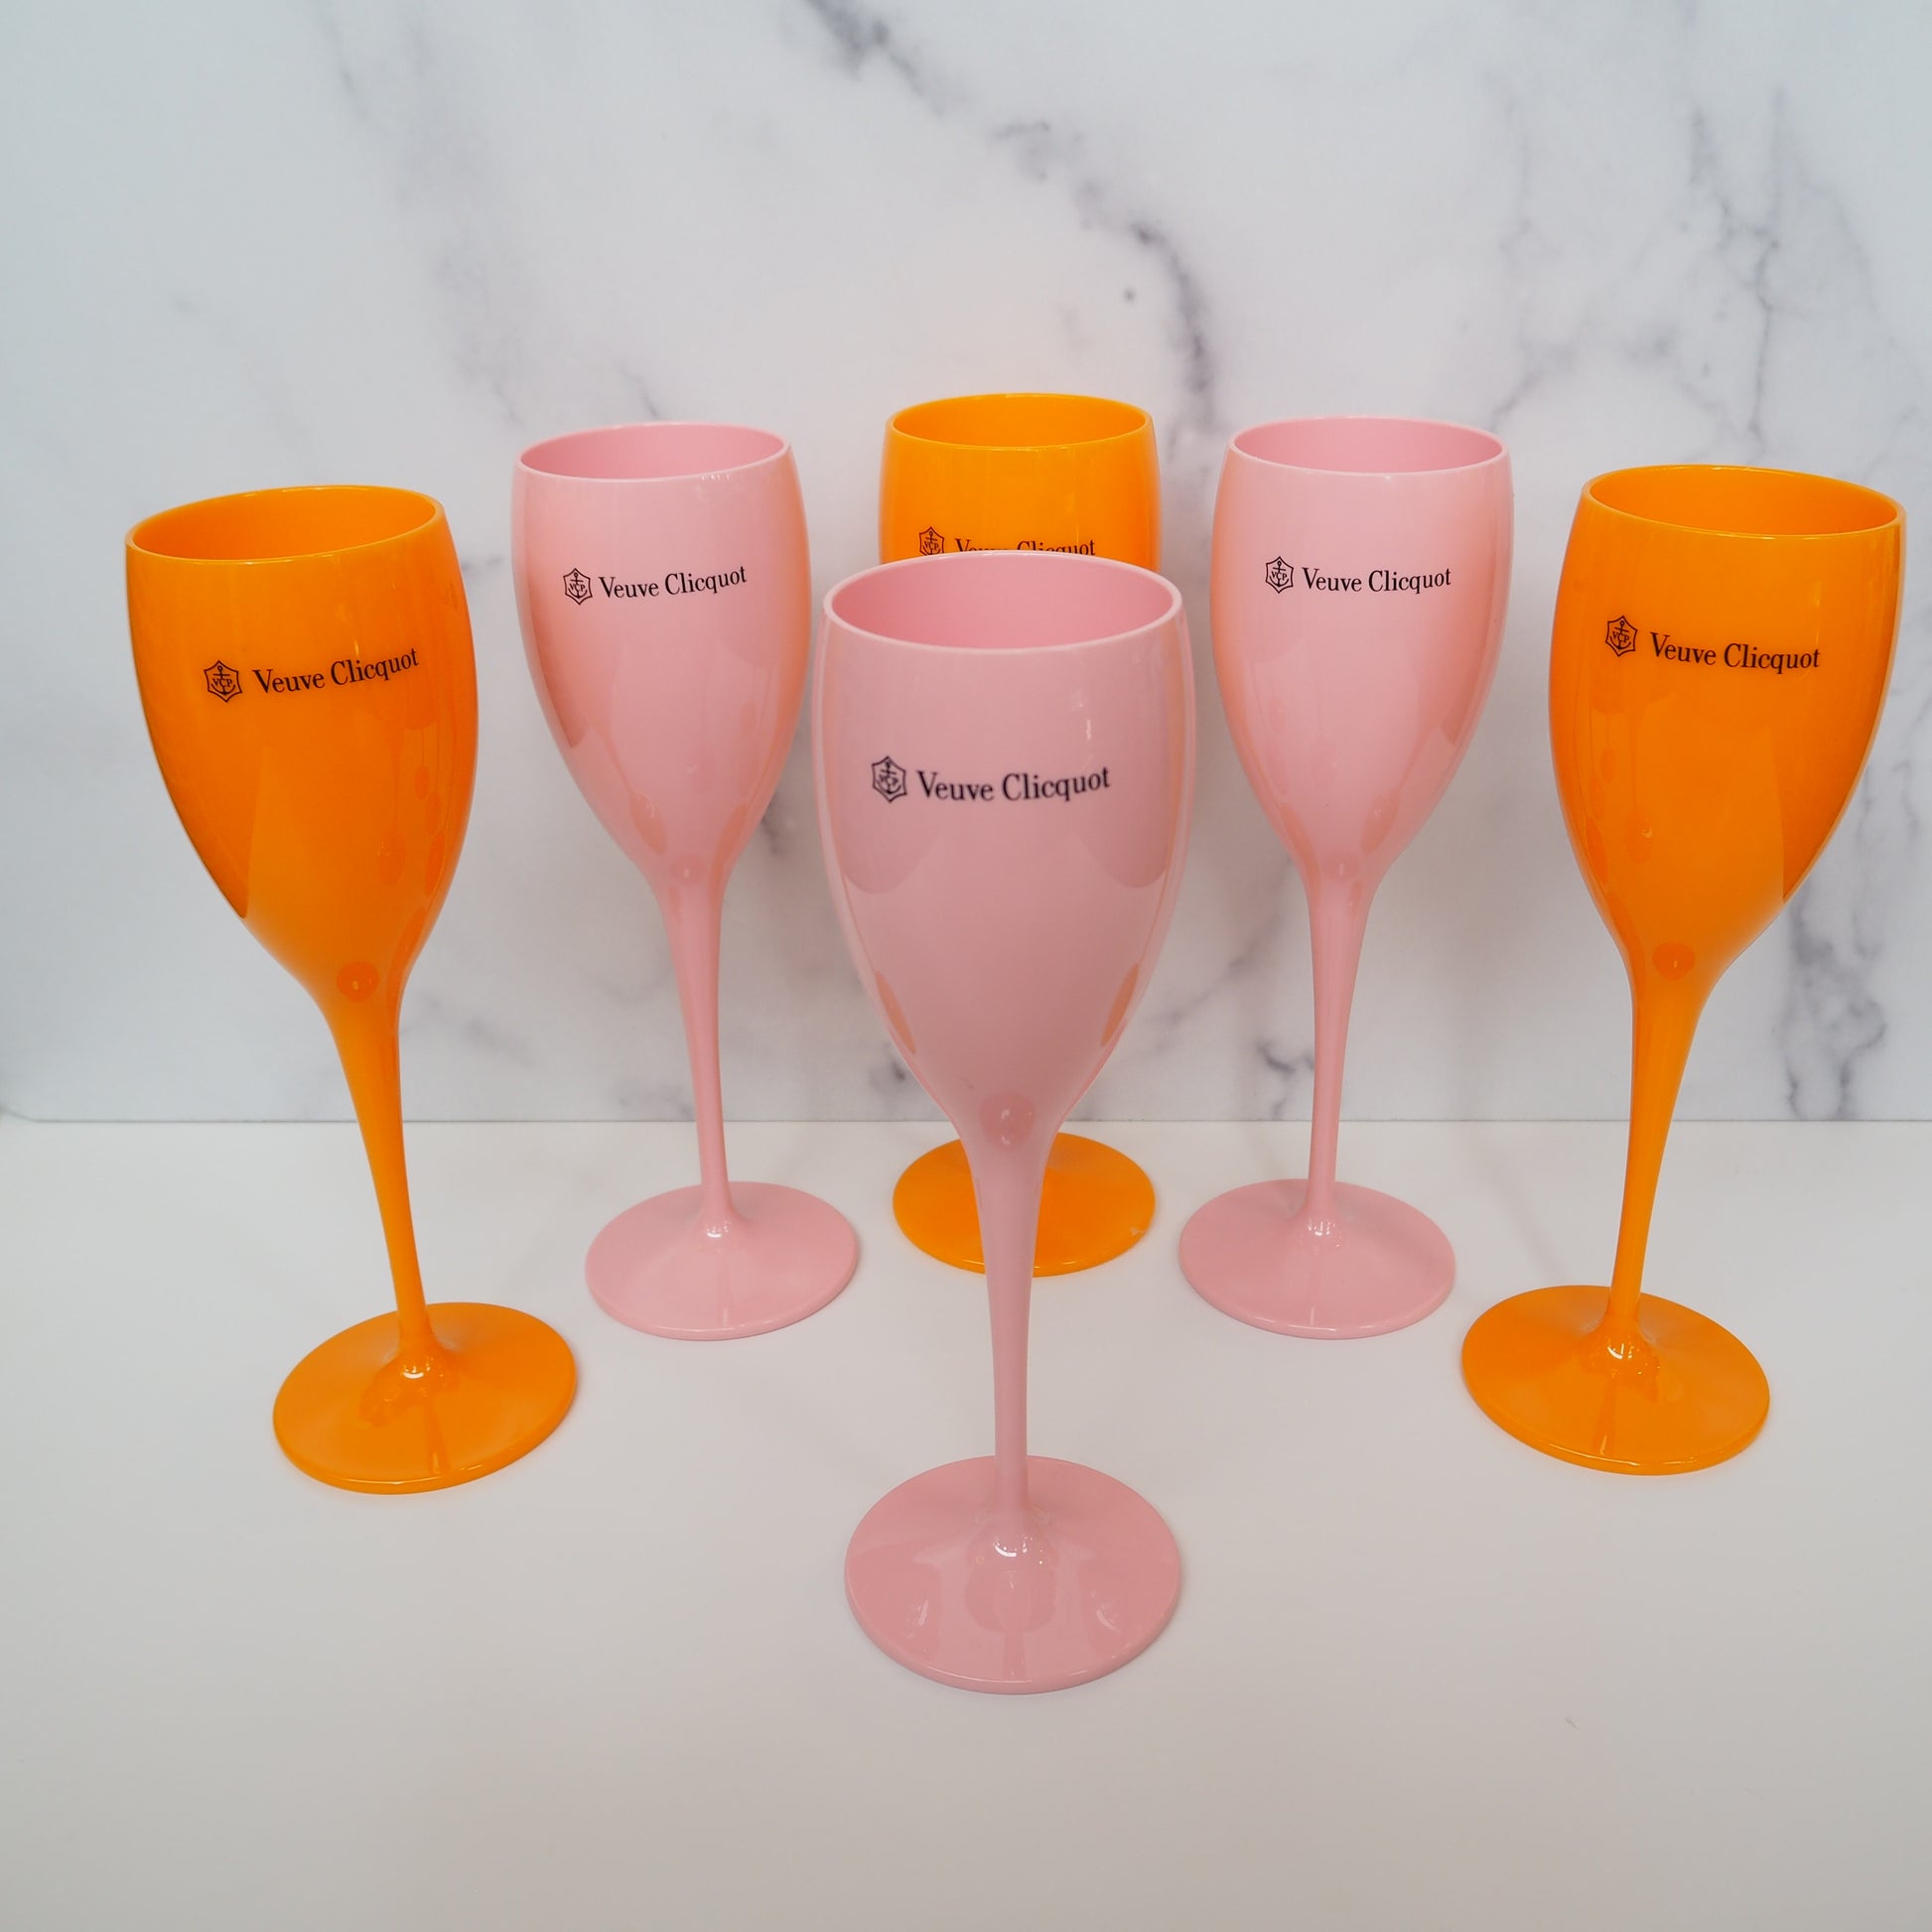 VEUVE CLICQUOT PINK ROSE CHAMPAGNE FLUTE GLASS CUP NEW X 4